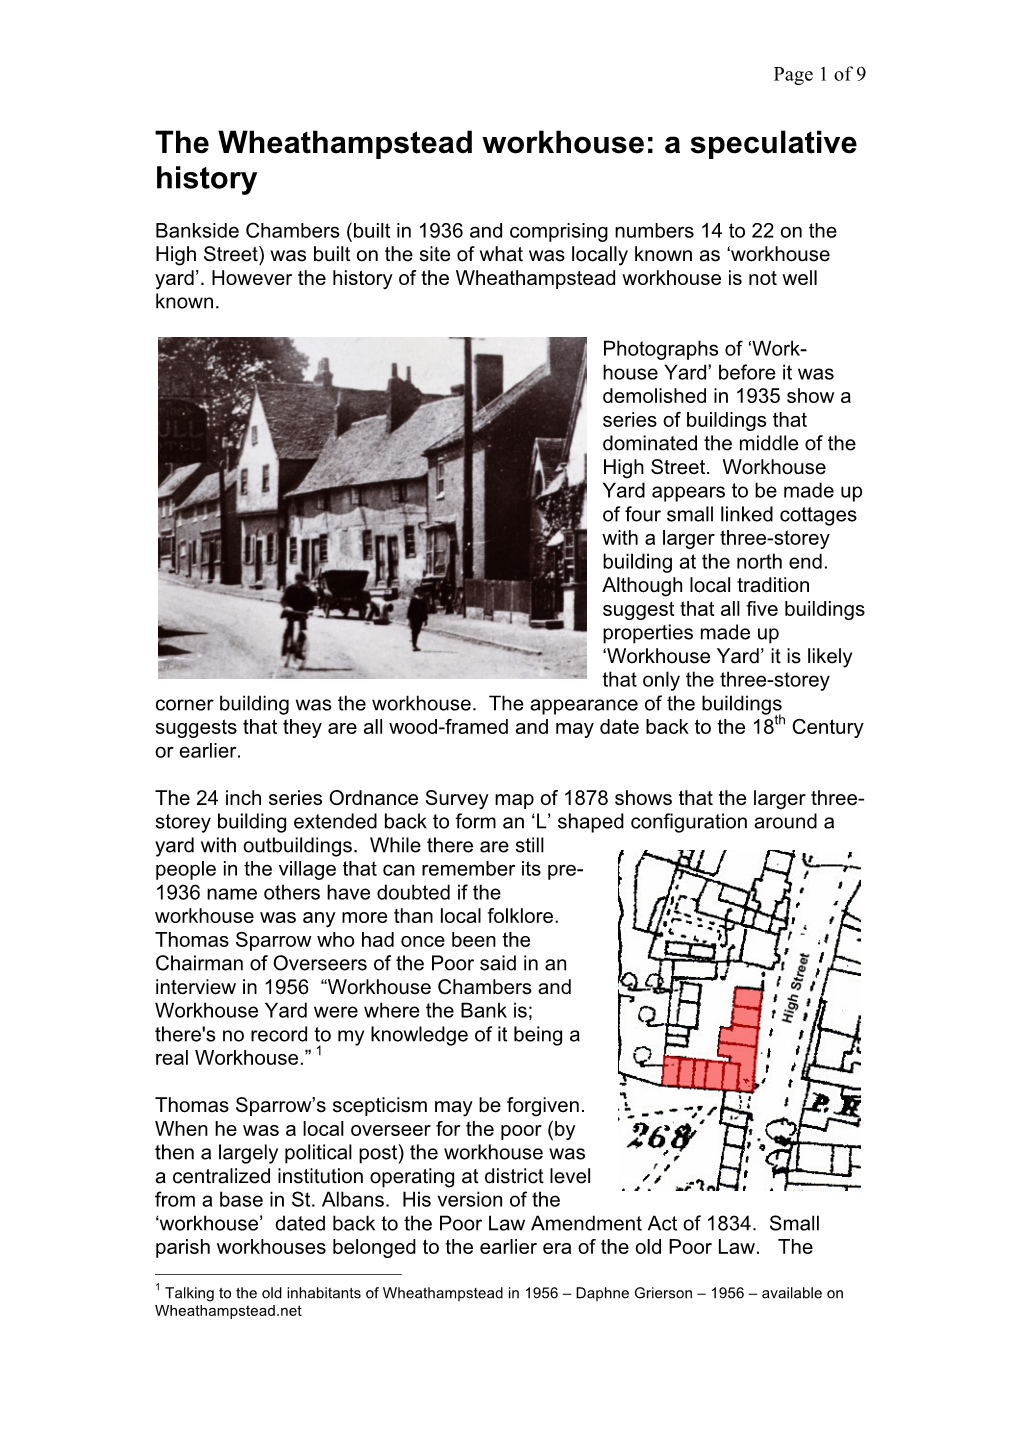 The Wheathampstead Workhouse: a Speculative History